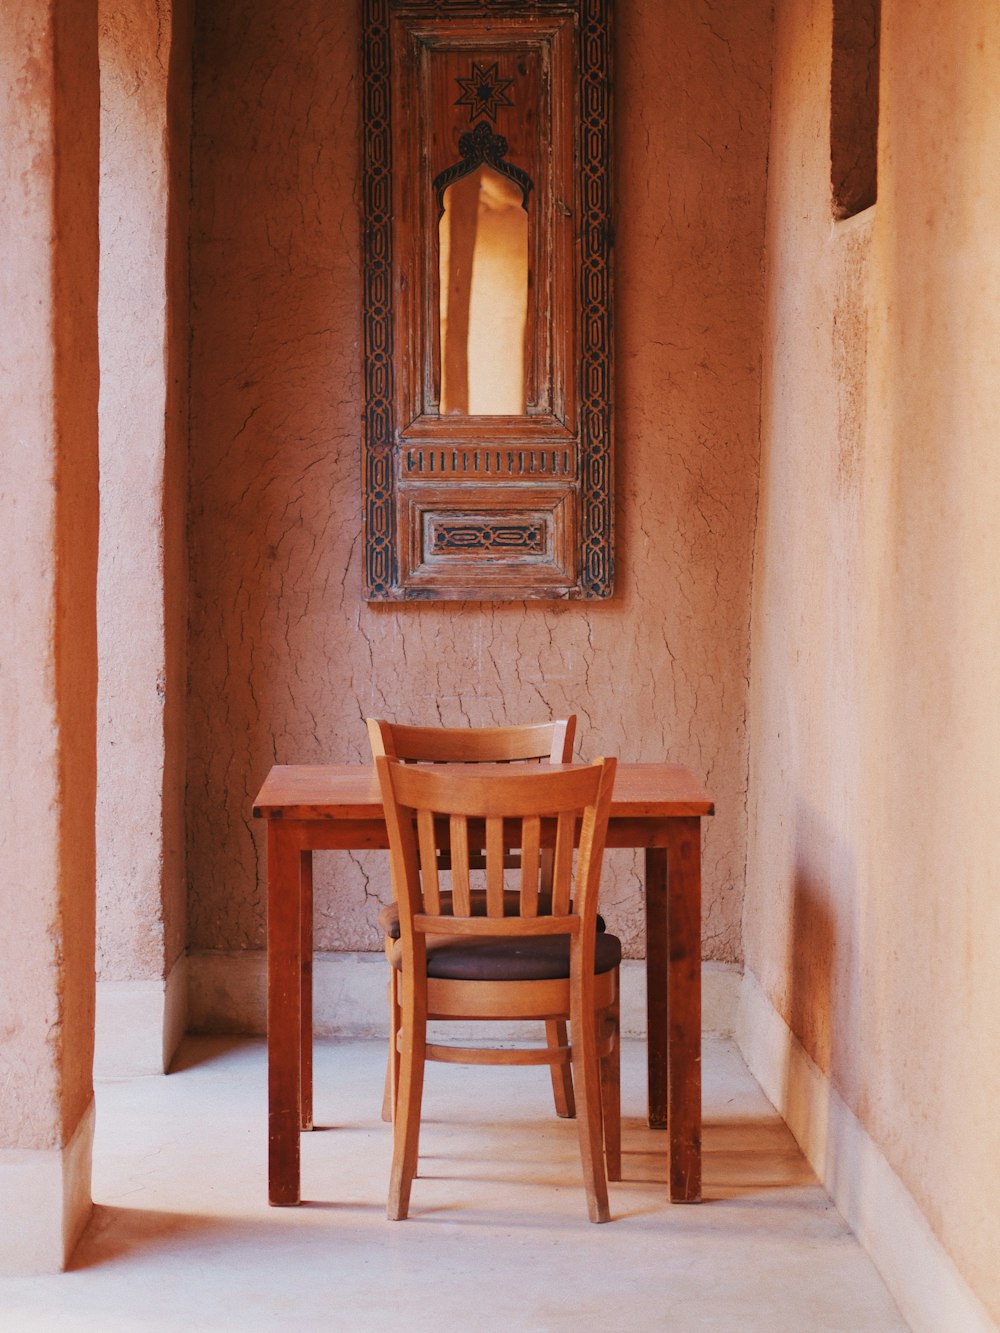 a wooden table and chair in a room